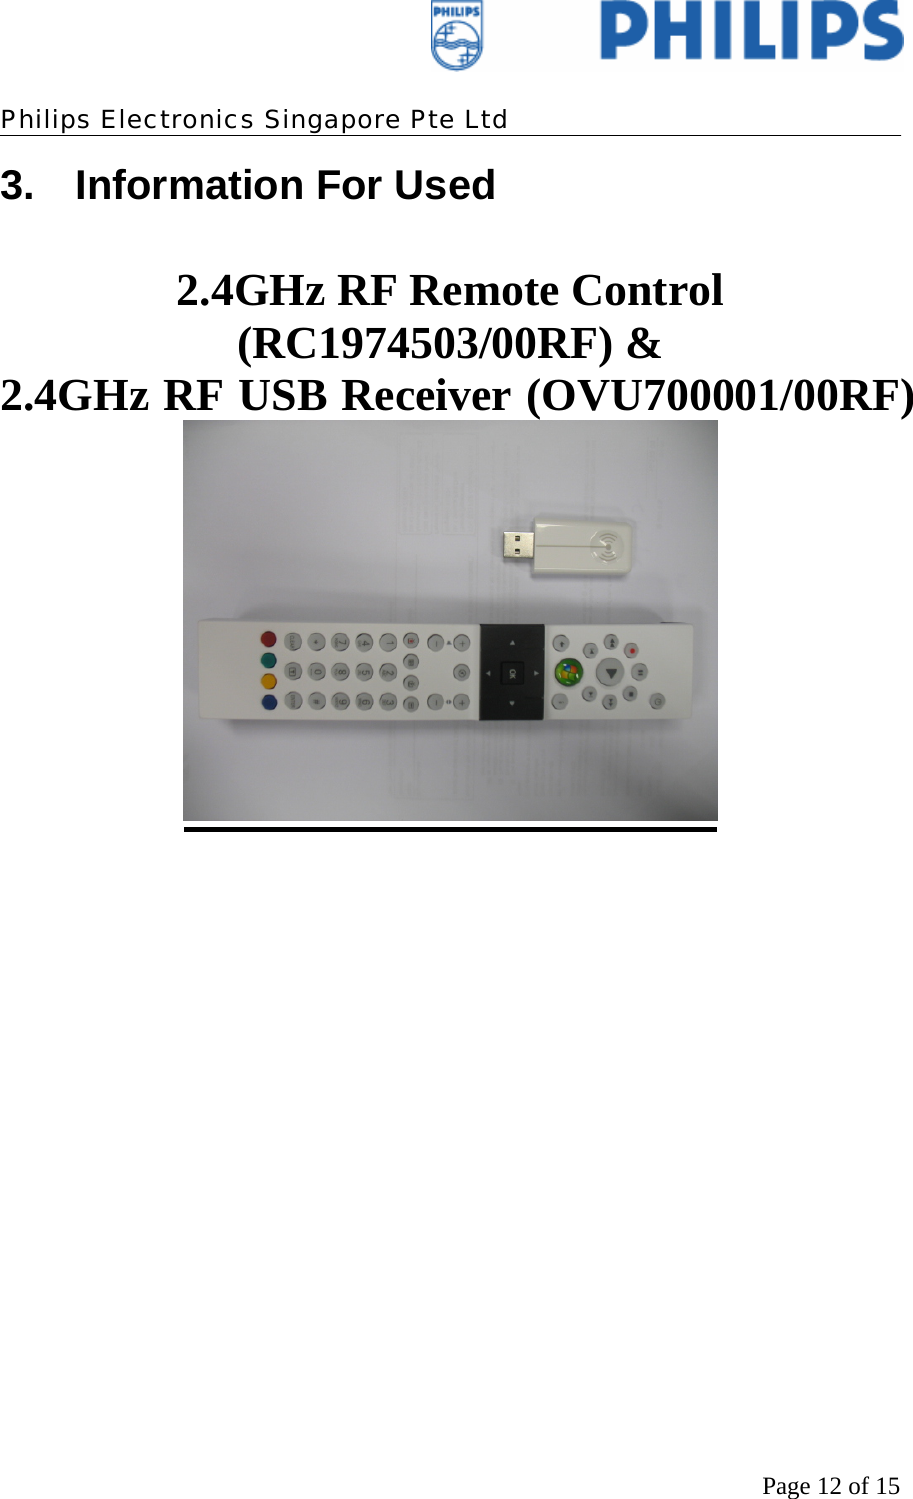    Philips Electronics Singapore Pte Ltd  Page 12 of 153. Information For Used  2.4GHz RF Remote Control (RC1974503/00RF) &amp;  2.4GHz RF USB Receiver (OVU700001/00RF)           